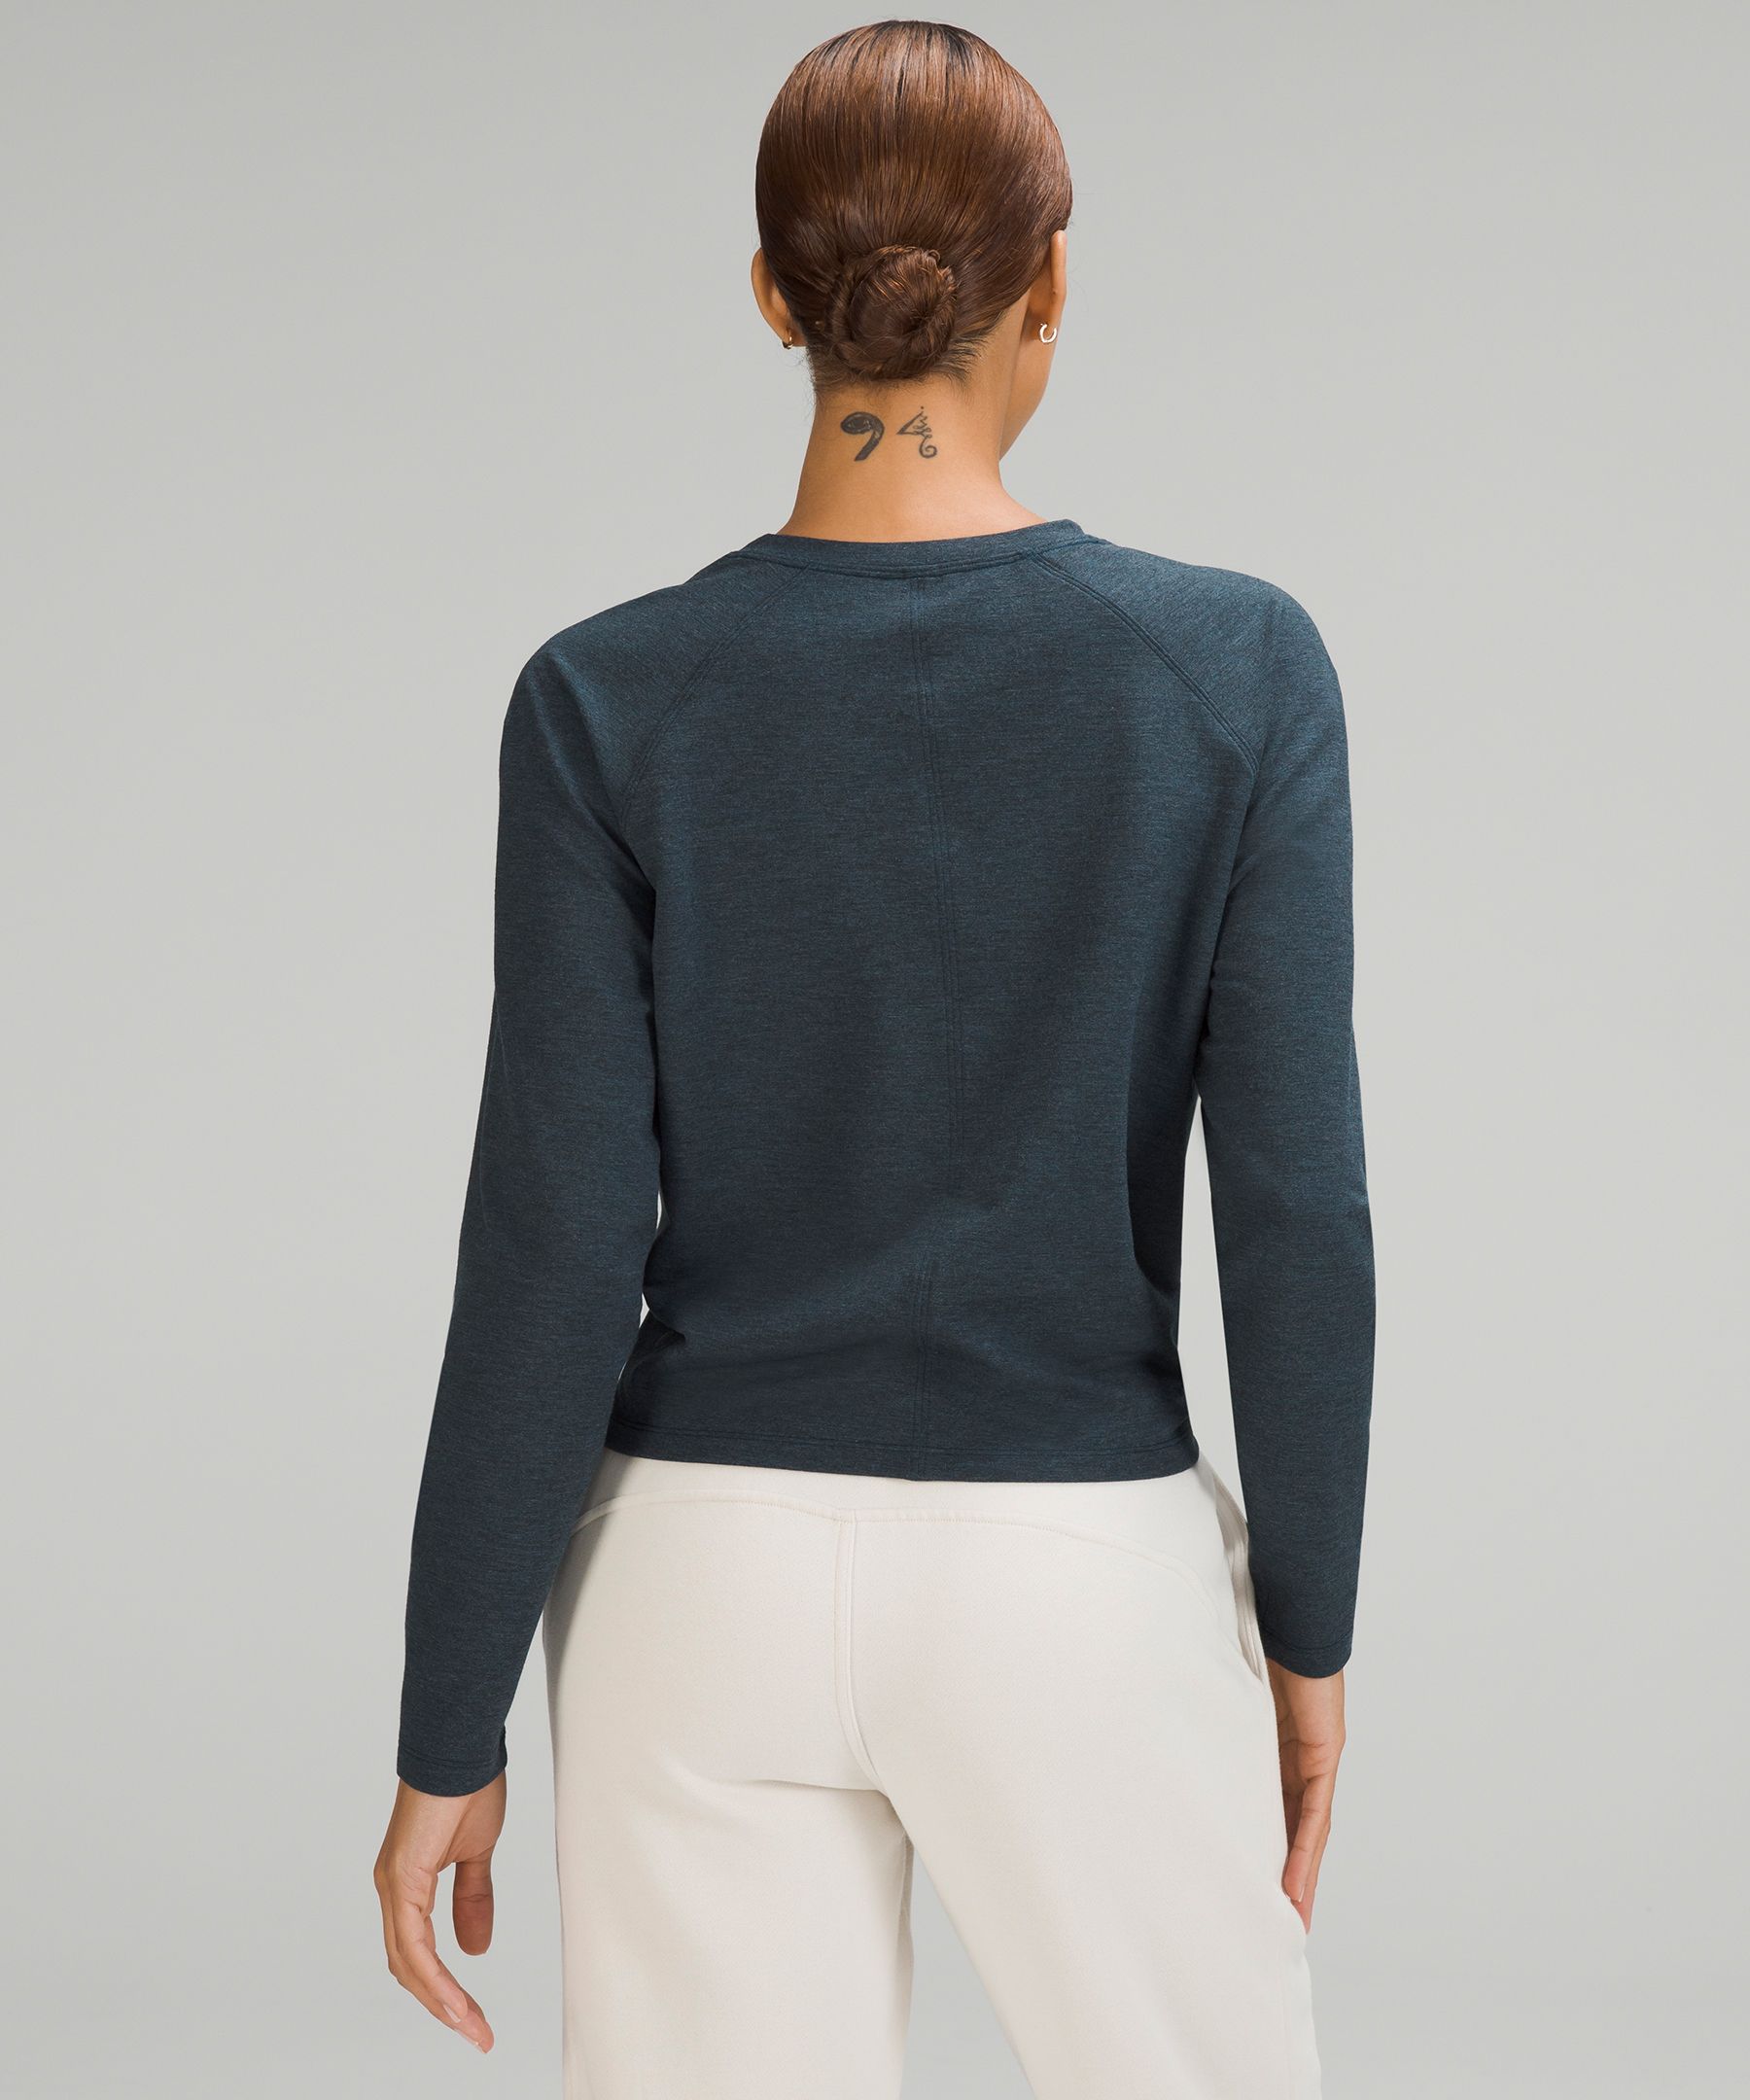 Tuck and Gather Pullover | Lululemon UK